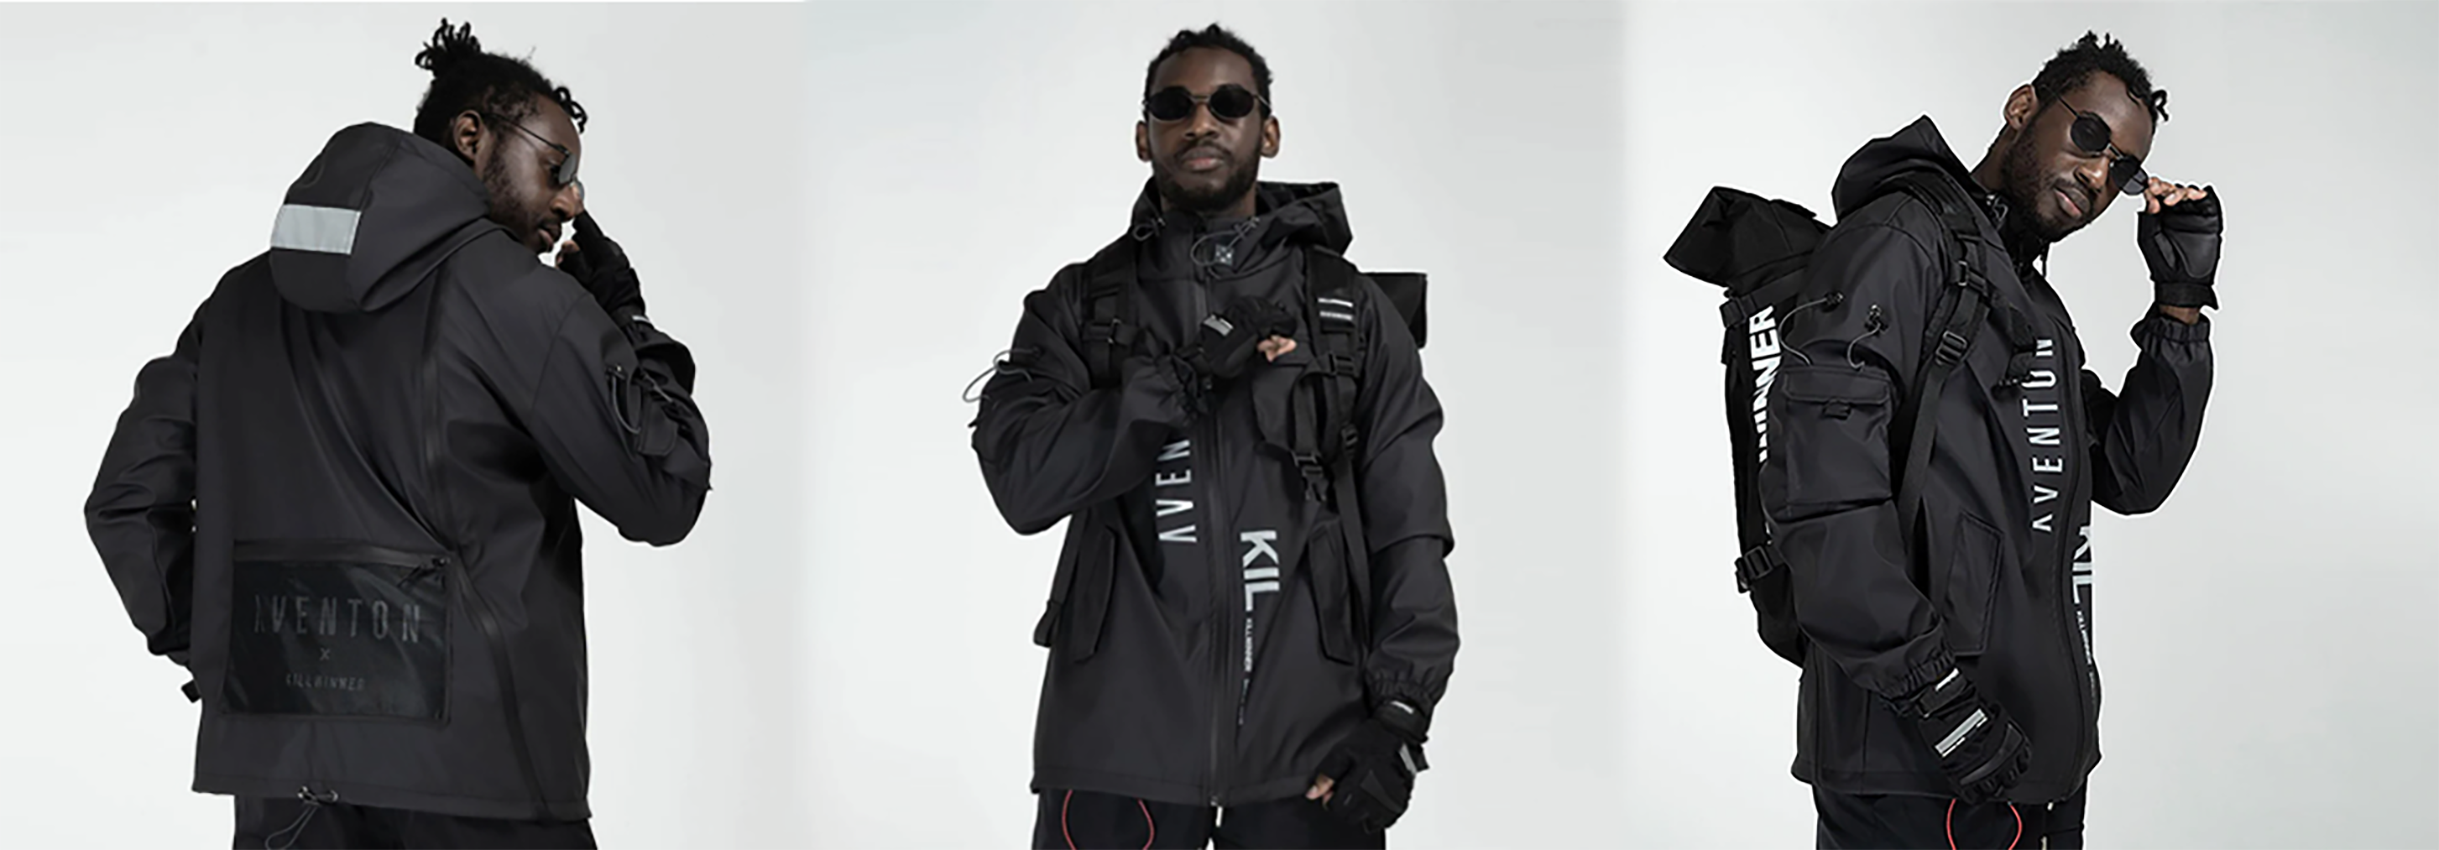 ALL THAT YOU NEED TO KNOW ABOUT THE TECHWEAR FASHION